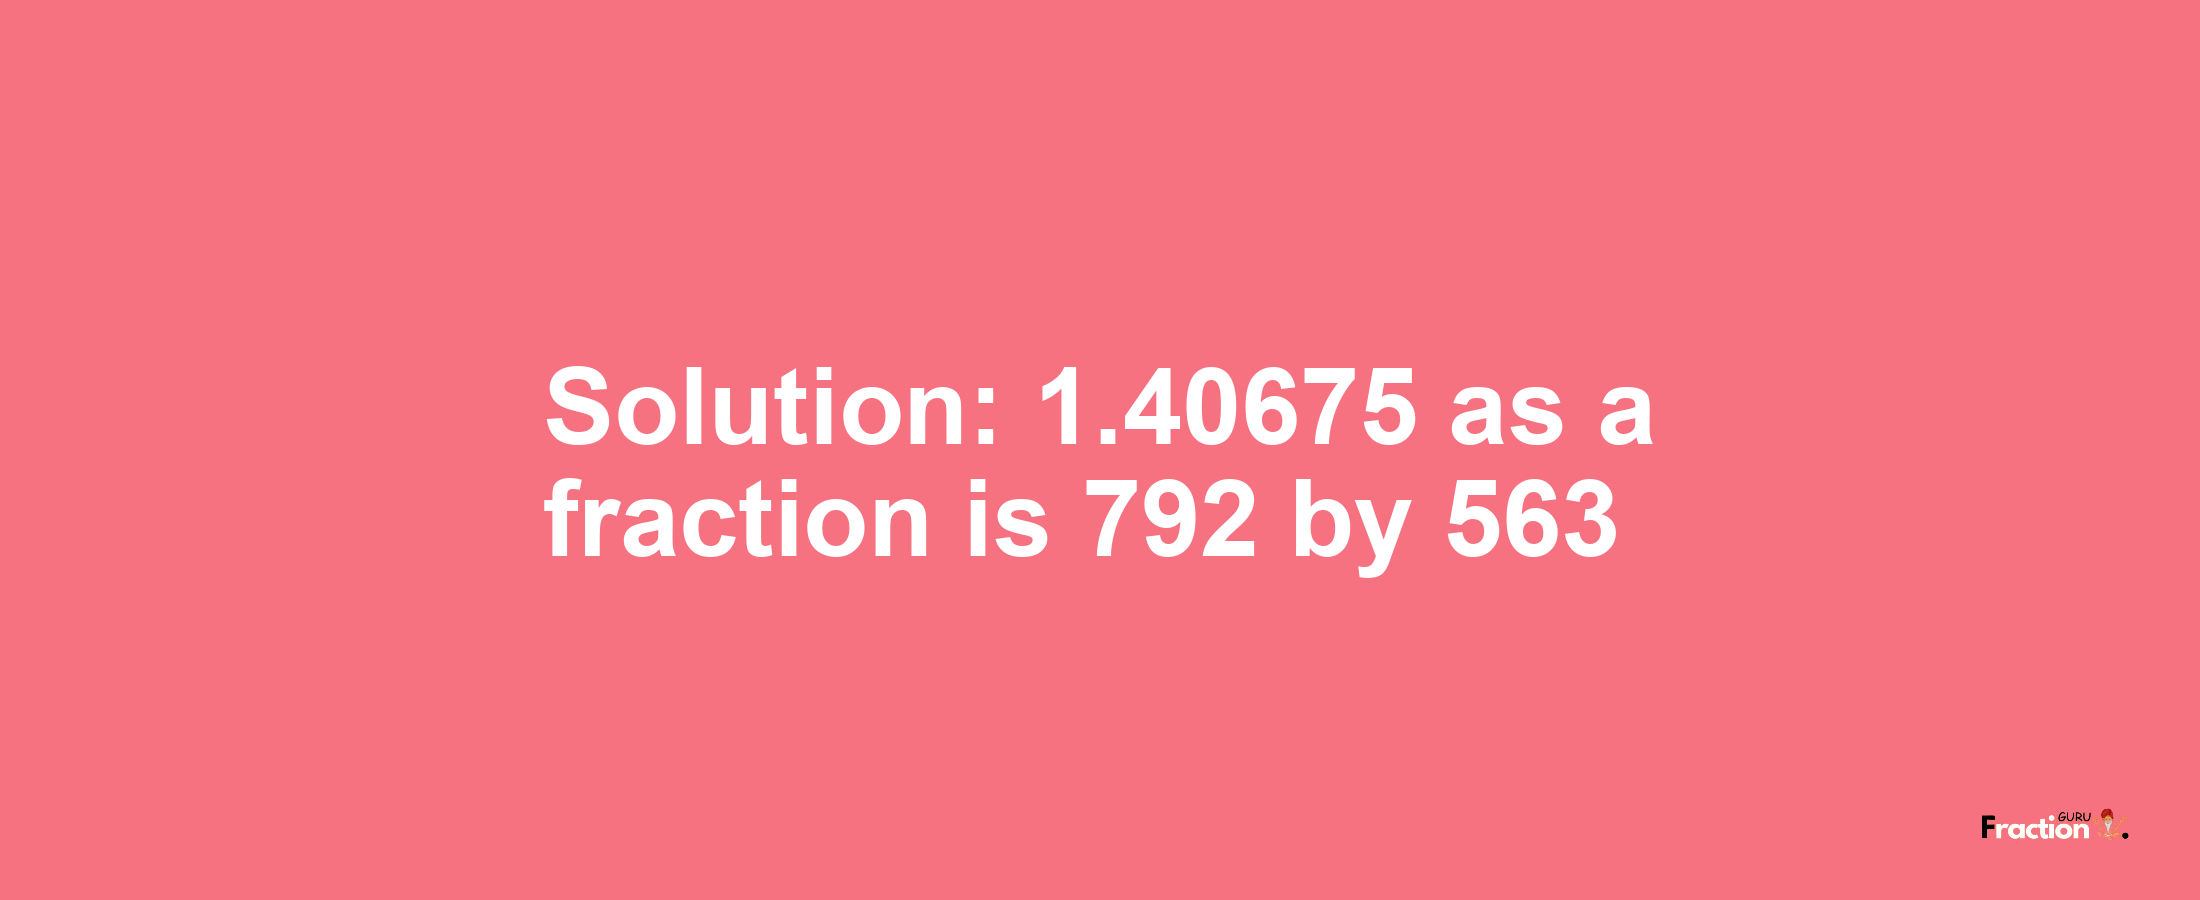 Solution:1.40675 as a fraction is 792/563